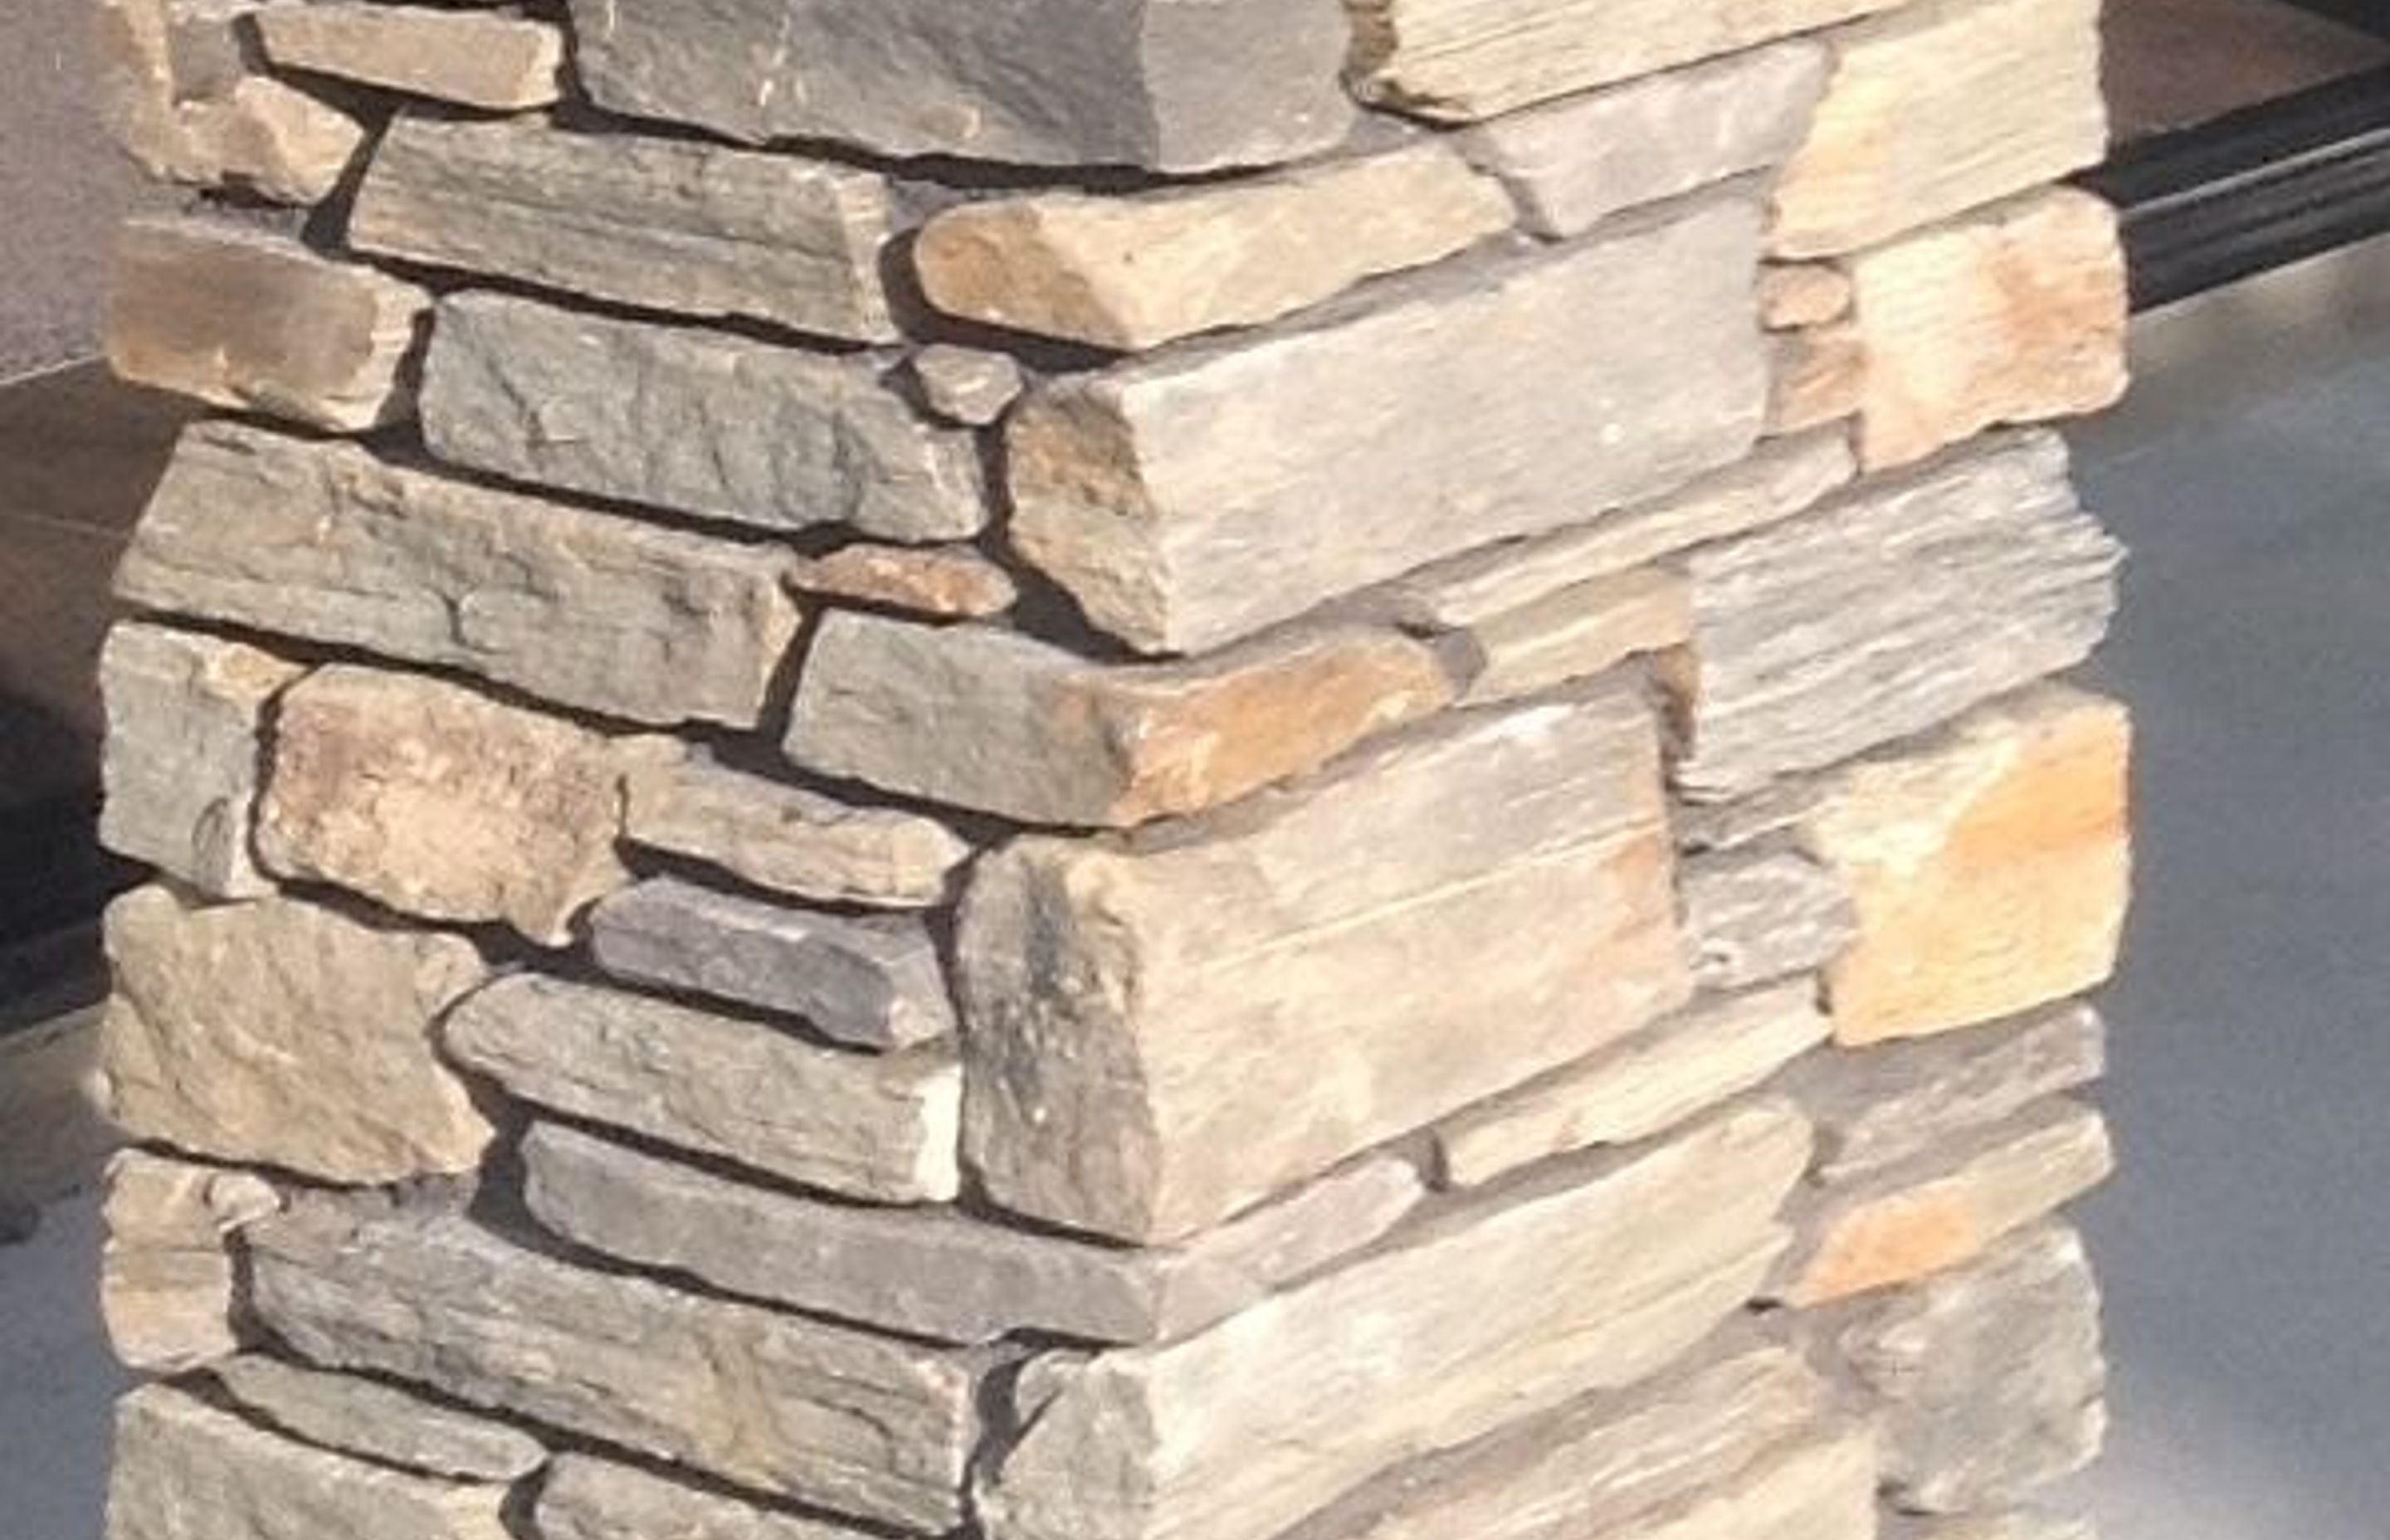 Raked: Recessed (or raked) stone has the mortar gently brushed out of the joints. This creates more shadow and texture in the wall.